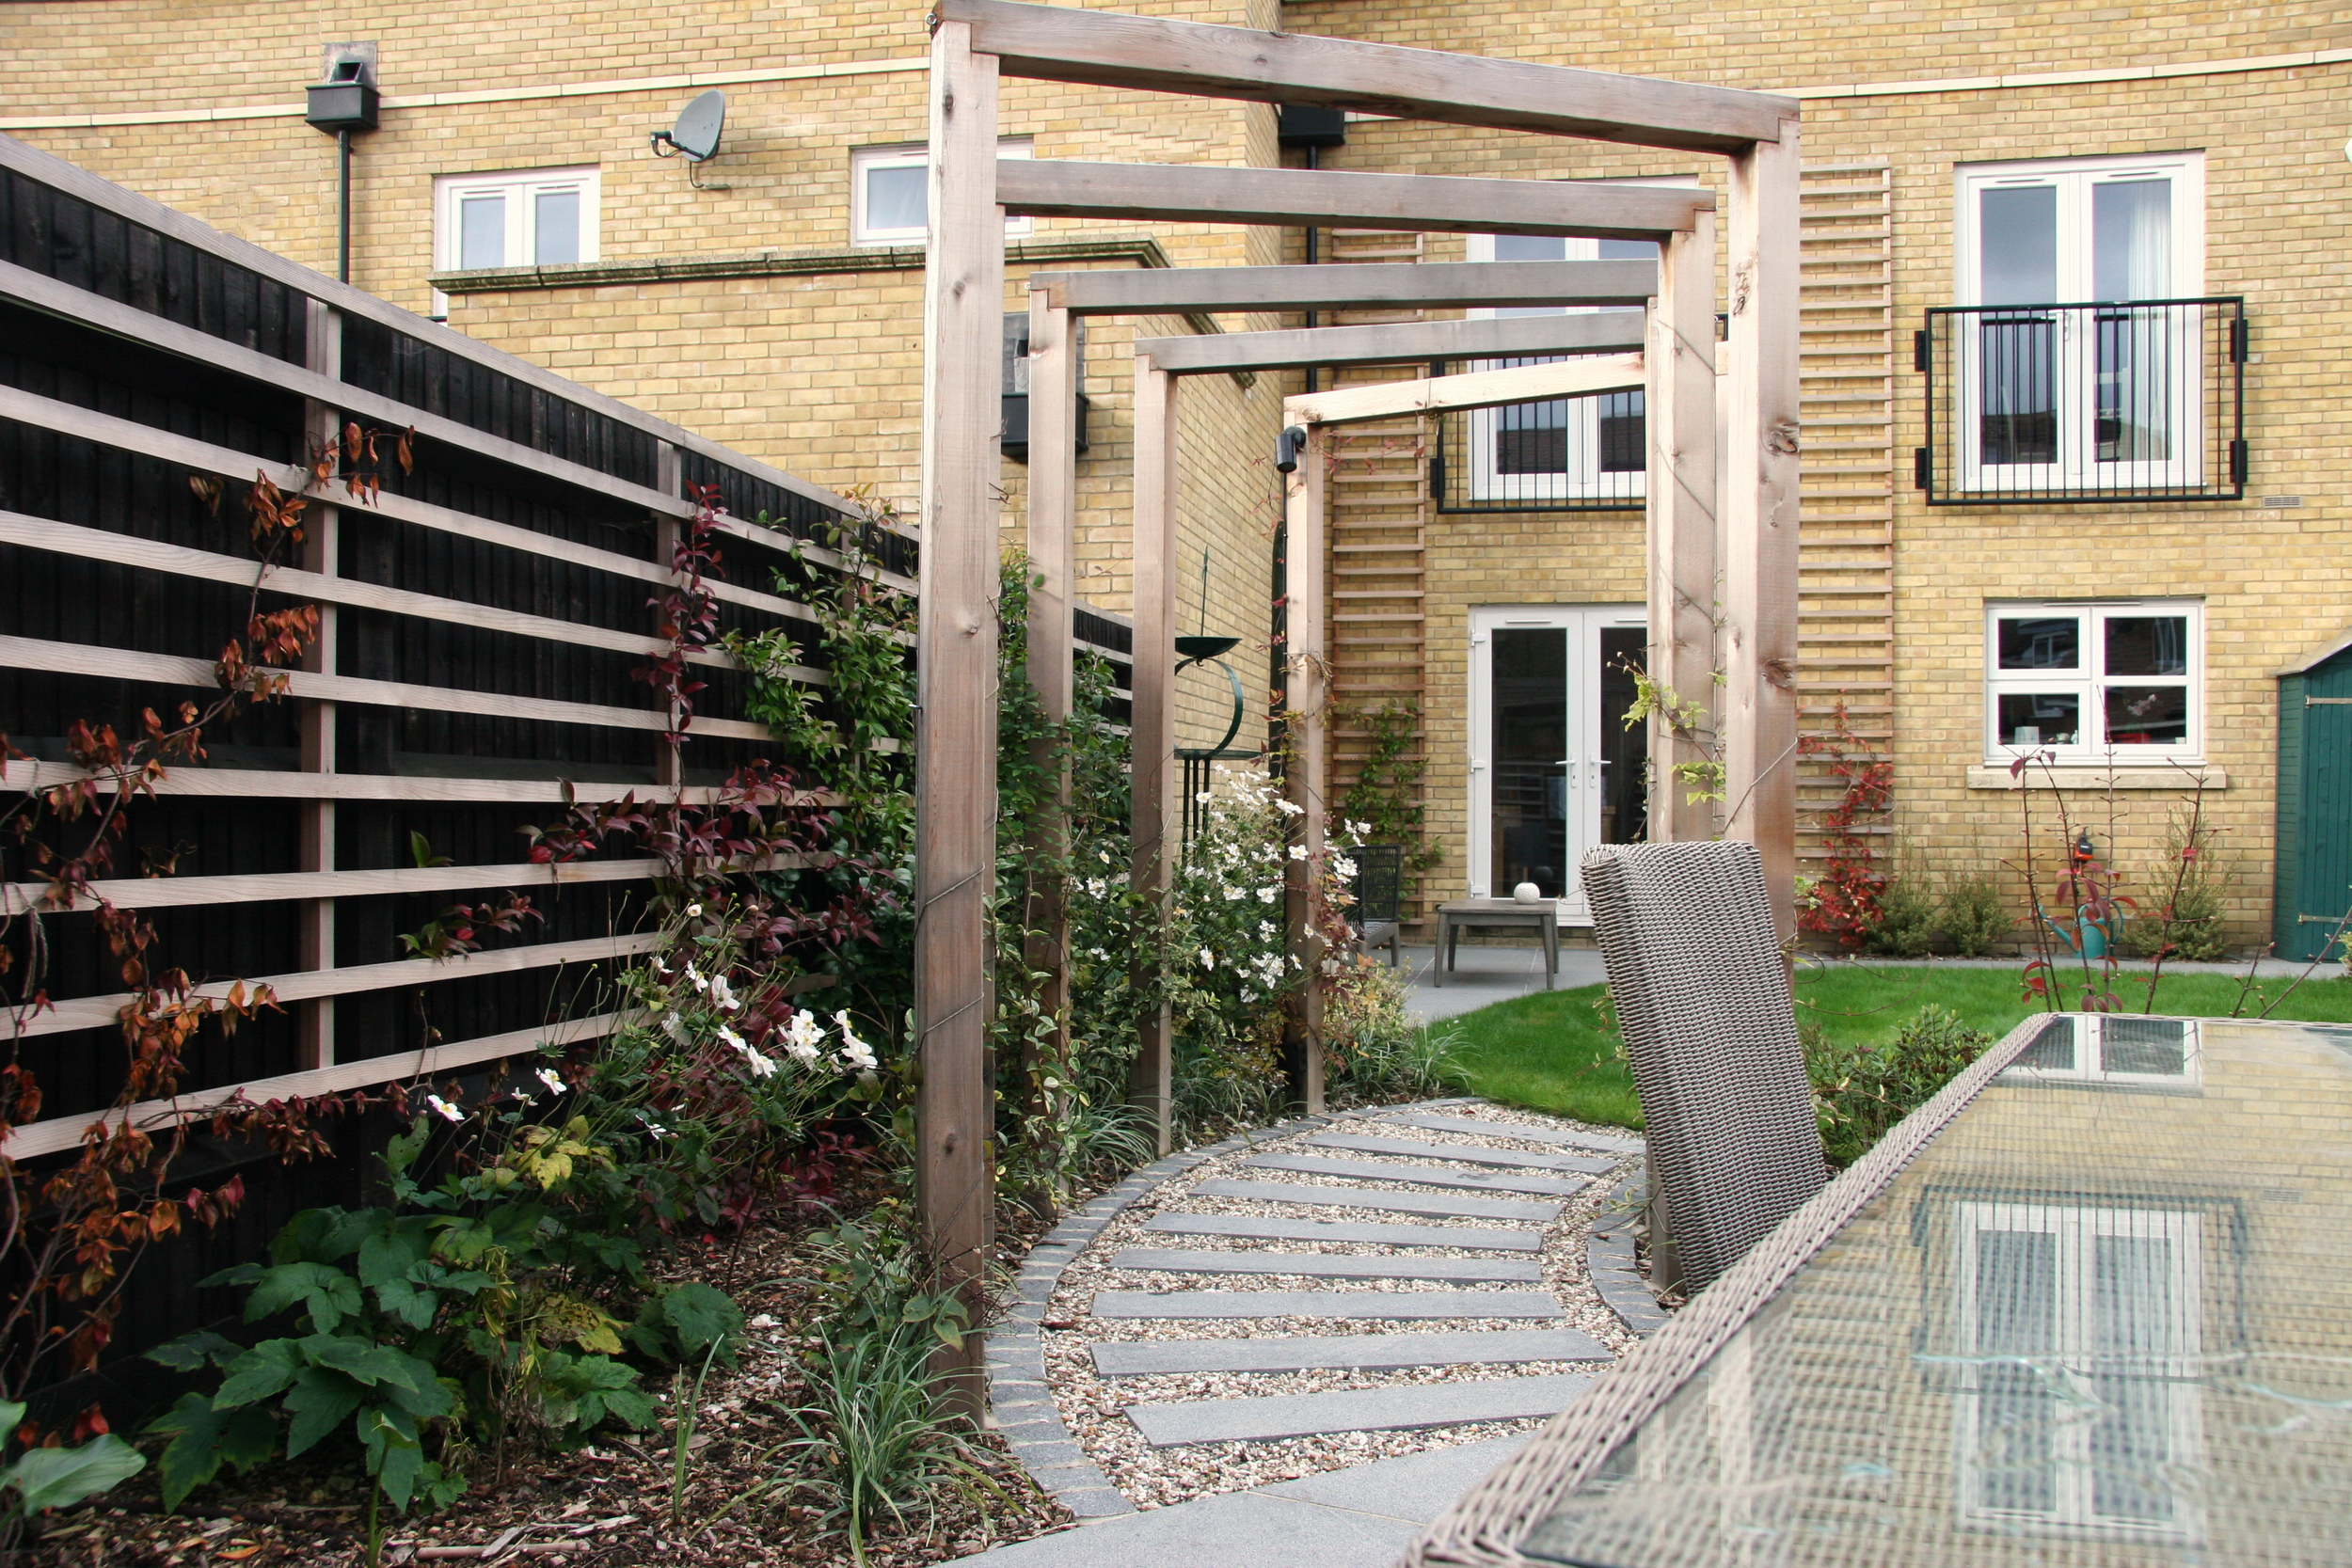 Garden ideas with Pergola over path leading from house to patio